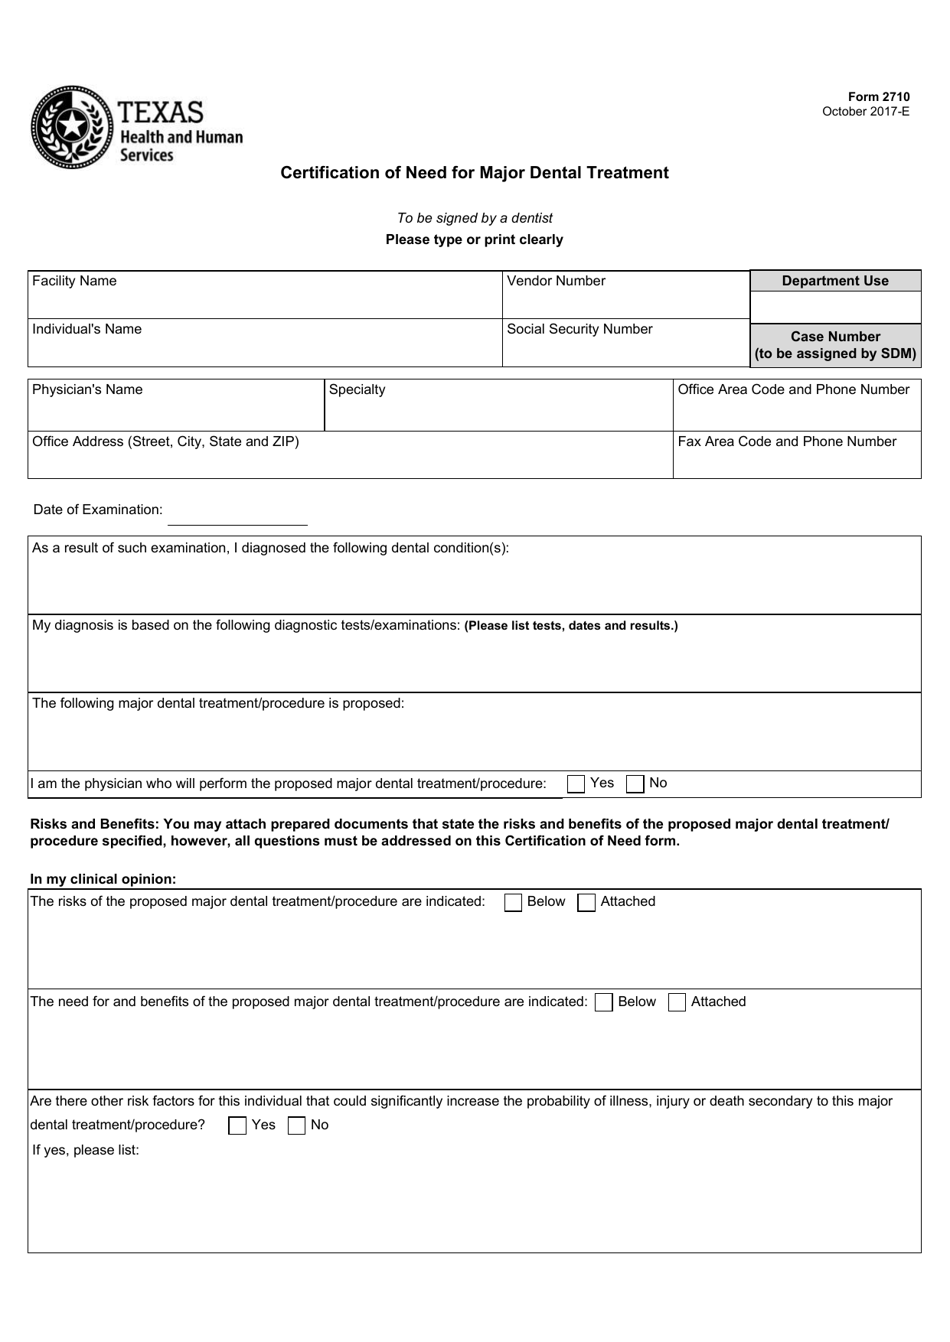 Form 2710 Certification of Need for Major Dental Treatment - Texas, Page 1